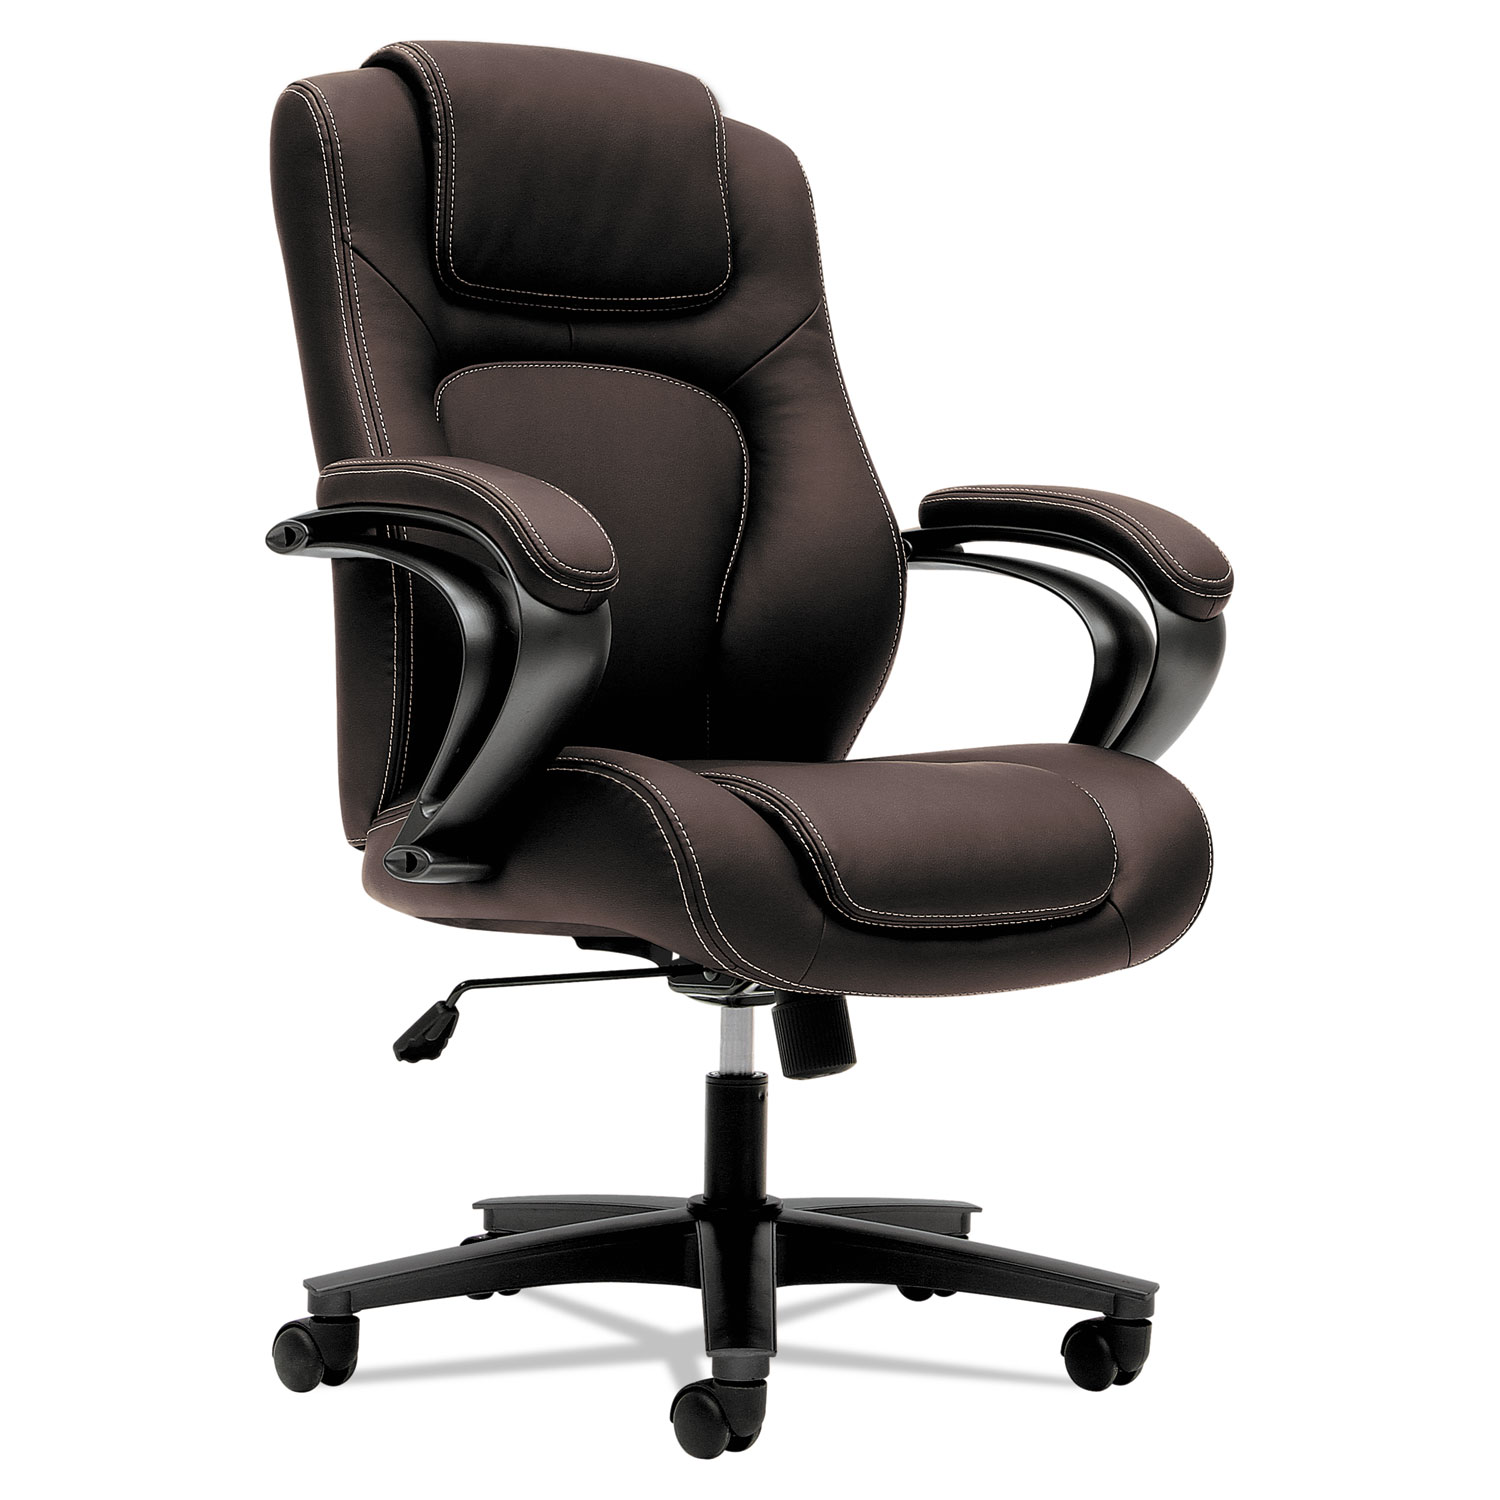  HON HVL402.EN45 HVL402 Series Executive High-Back Chair, Supports up to 250 lbs., Brown Seat/Brown Back, Black Base (BSXVL402EN45) 